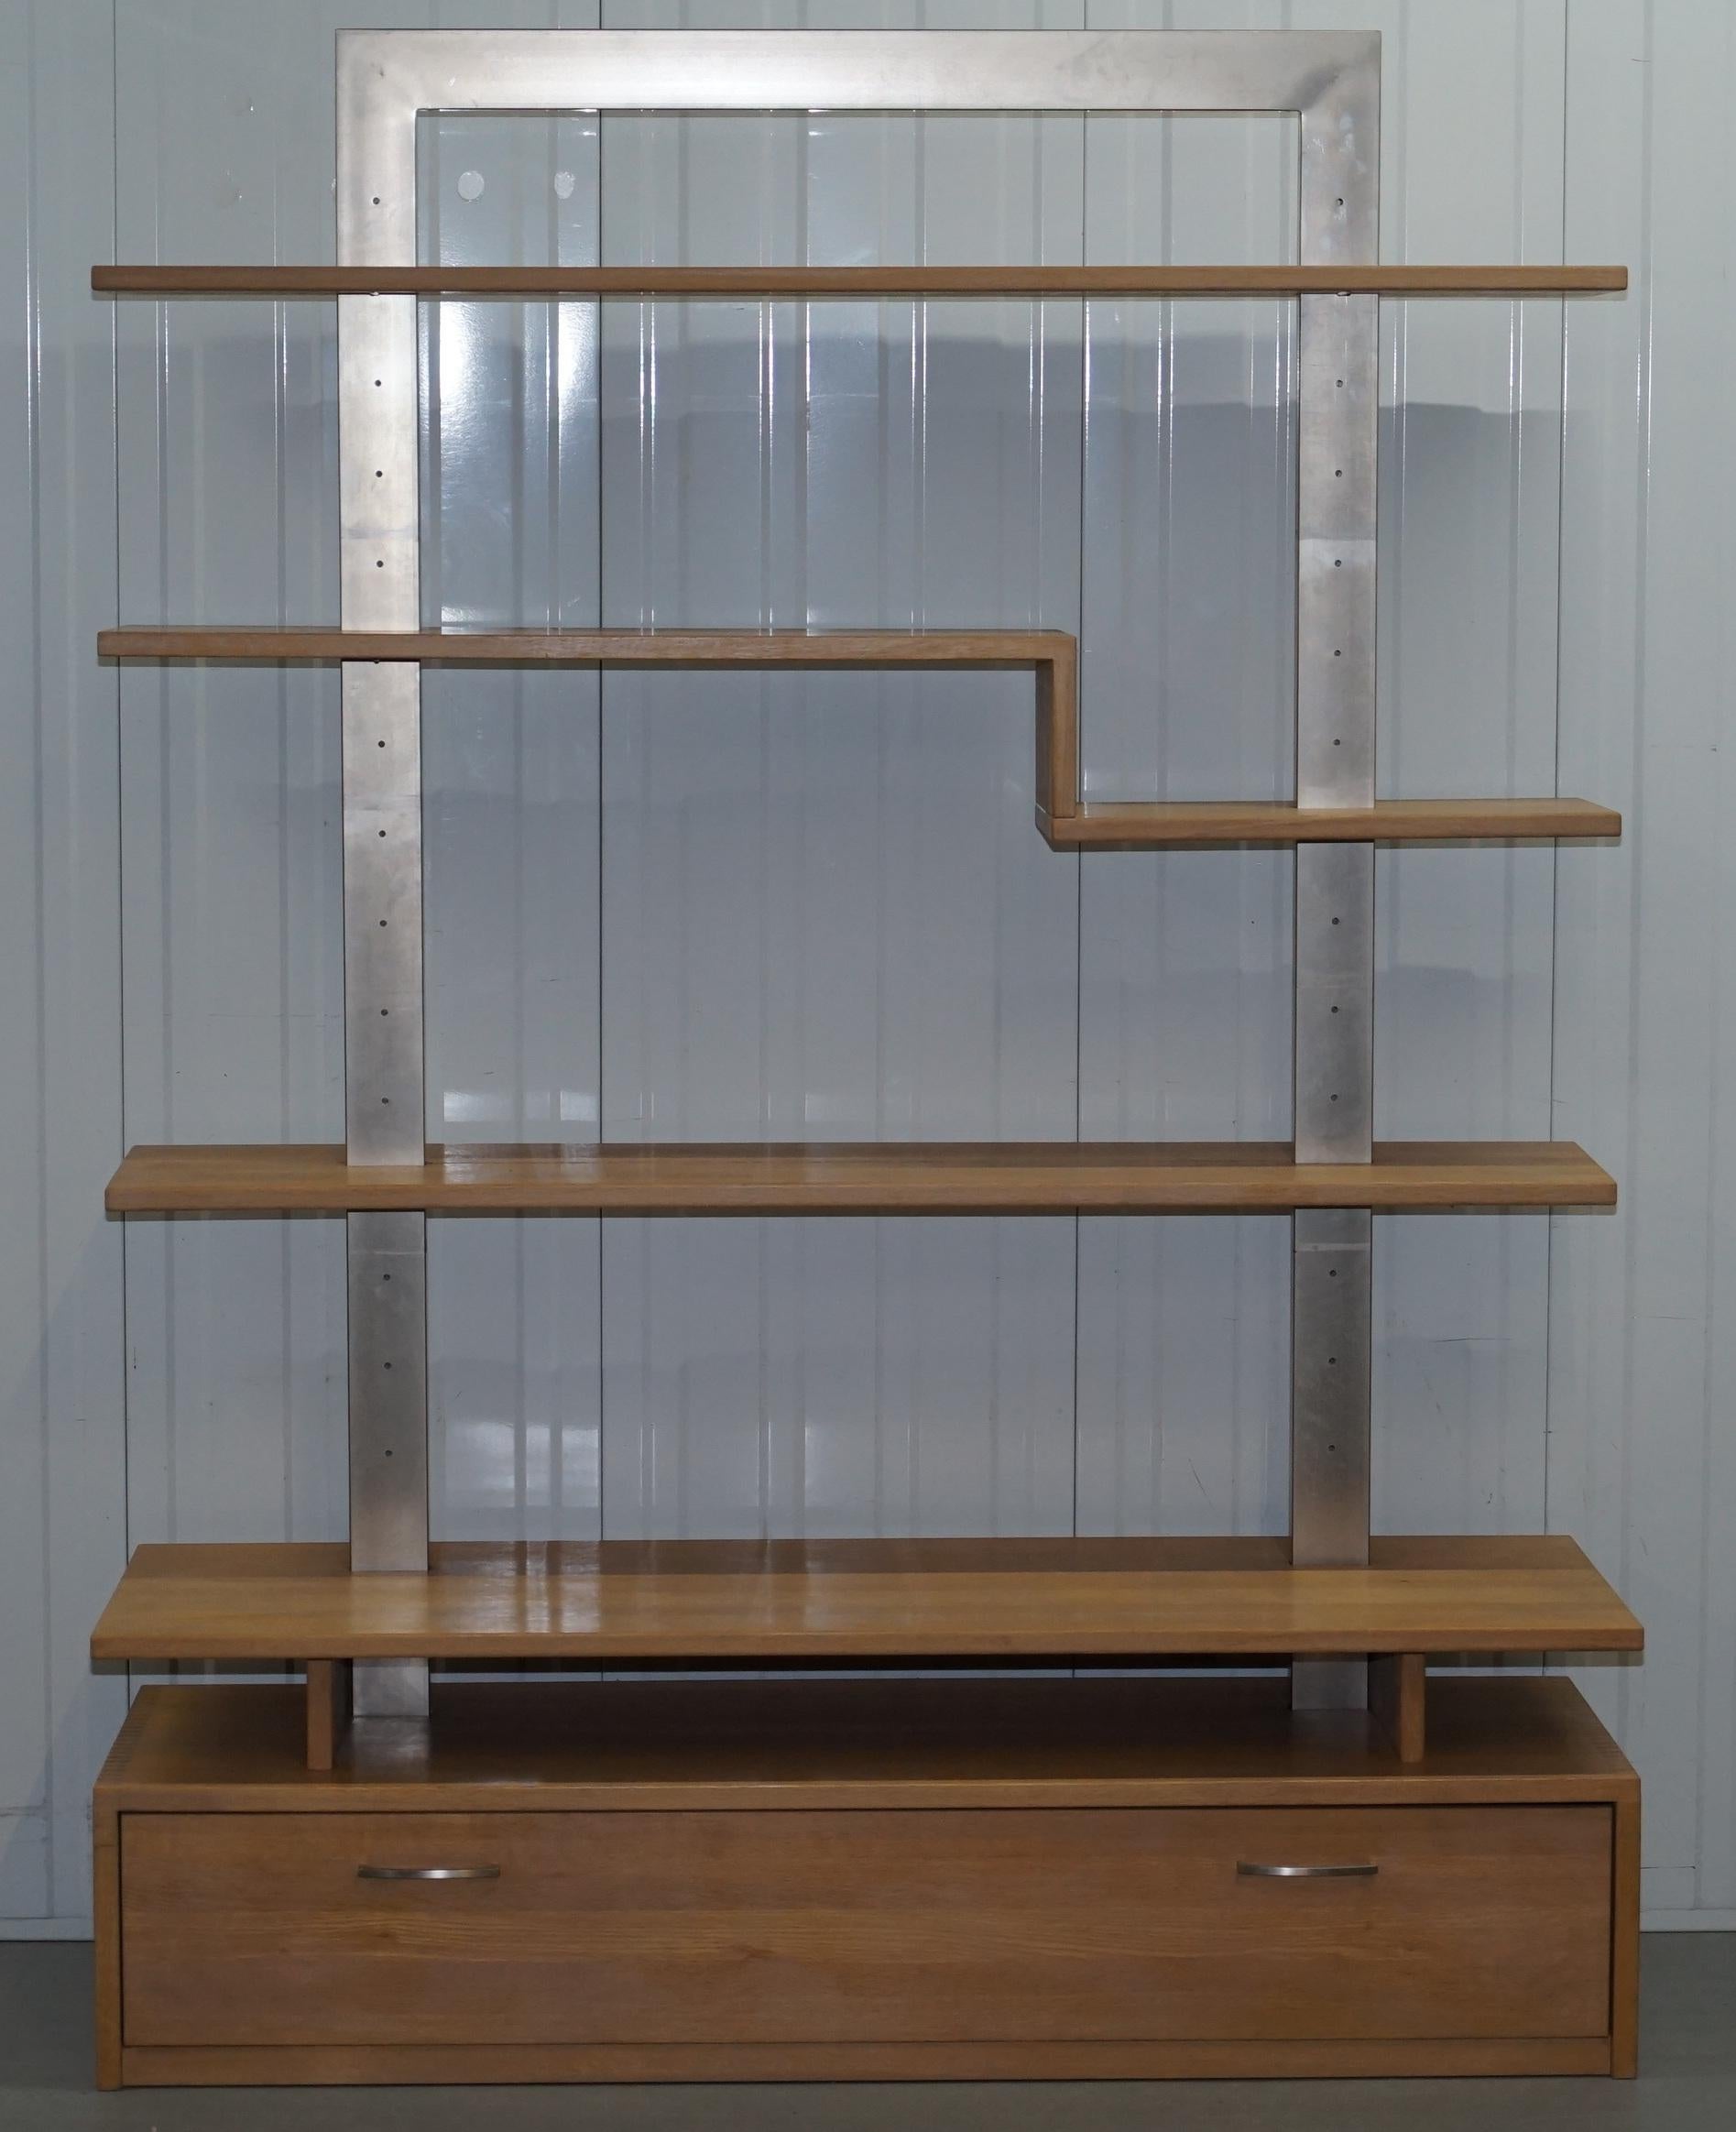 We are delighted to offer for auction this original Orum Mobler Ash and chrome freestanding bookcase with large base drawer

Please note the delivery fee listed is just a guide, it covers within the M25 only

This bookcase is part of a suite, I